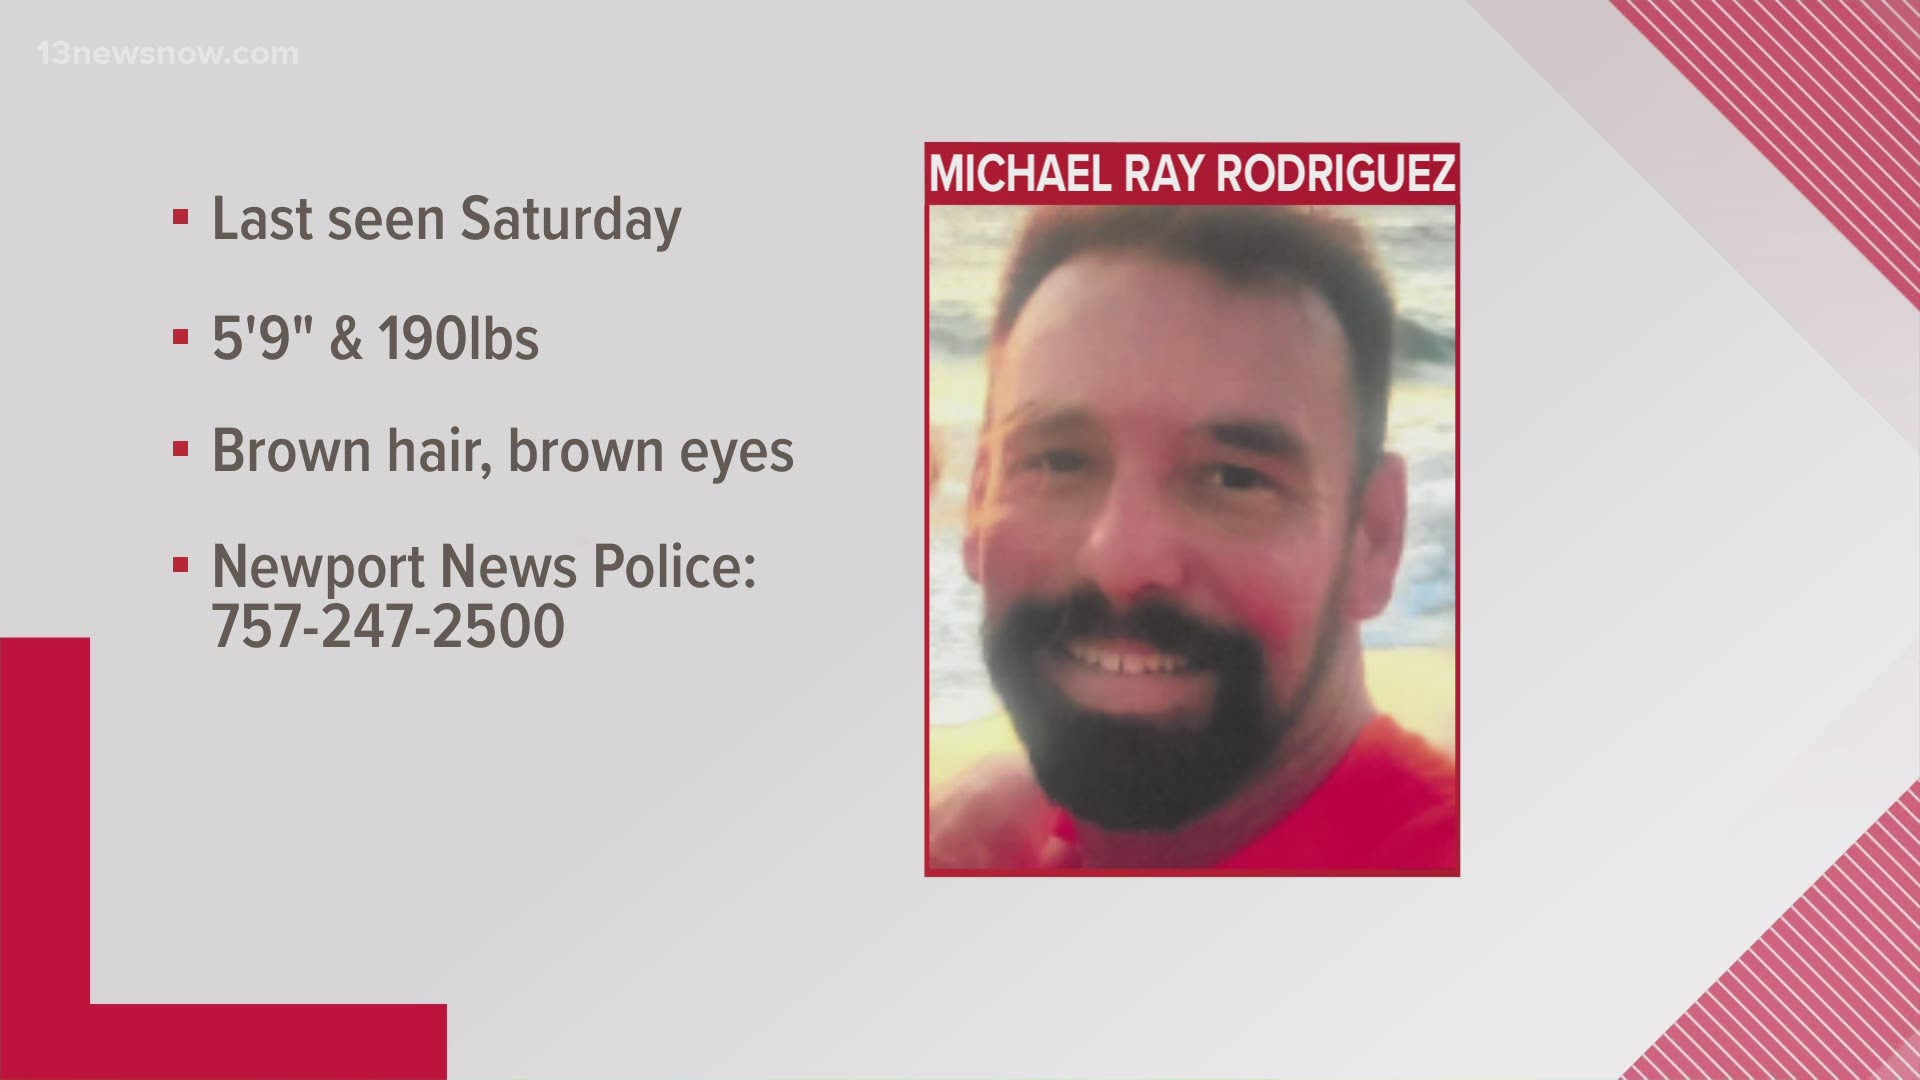 Newport News police said they are looking for  44-year-old Michael R. Rodriguez who has been missing since Saturday.